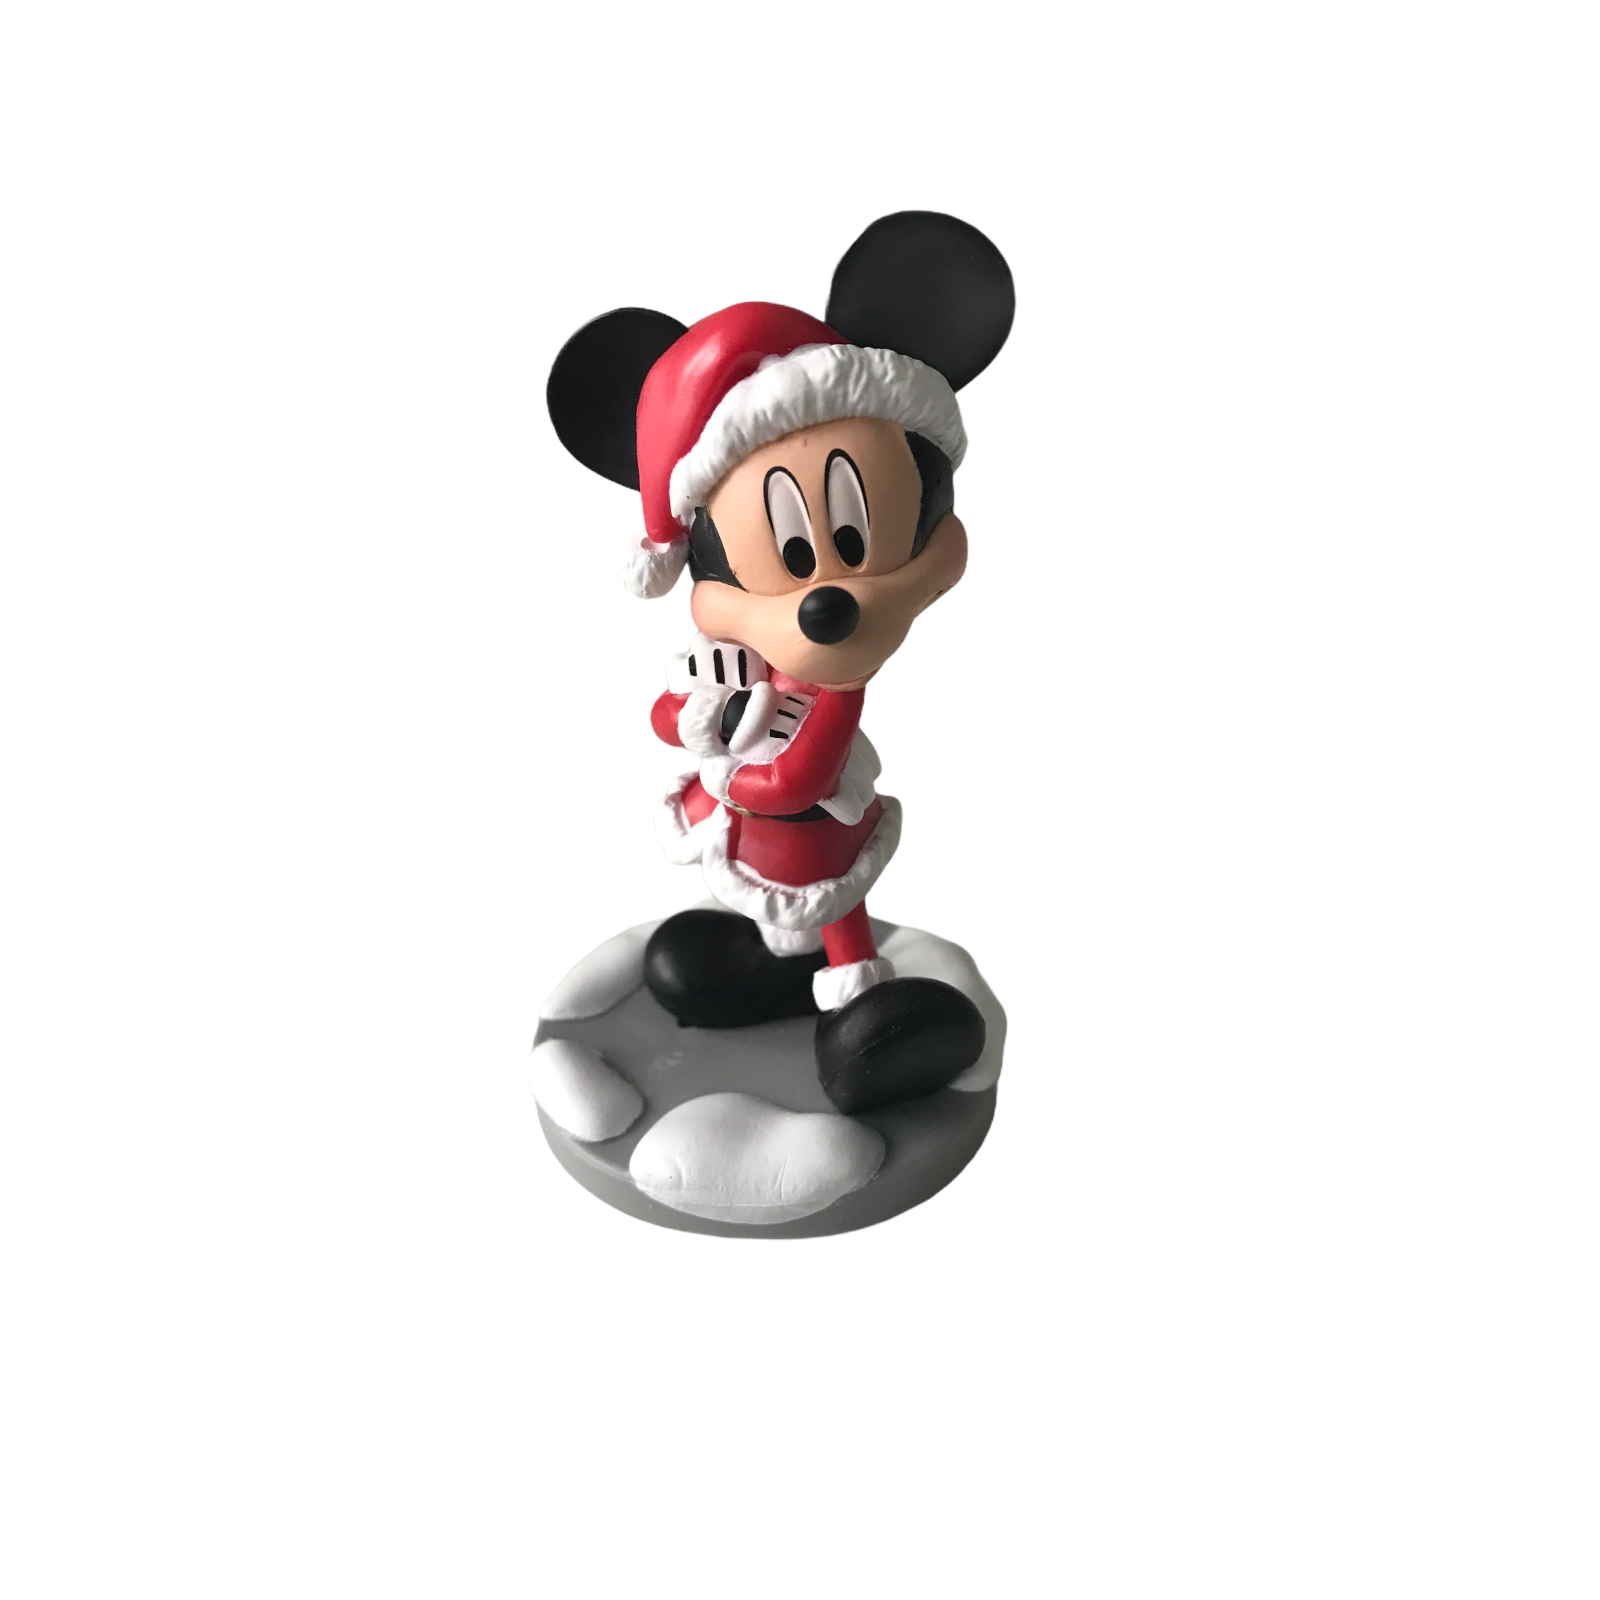 Disney Store Mickey Mouse Christmas Figure Cake Topper 2020 NEW PVC